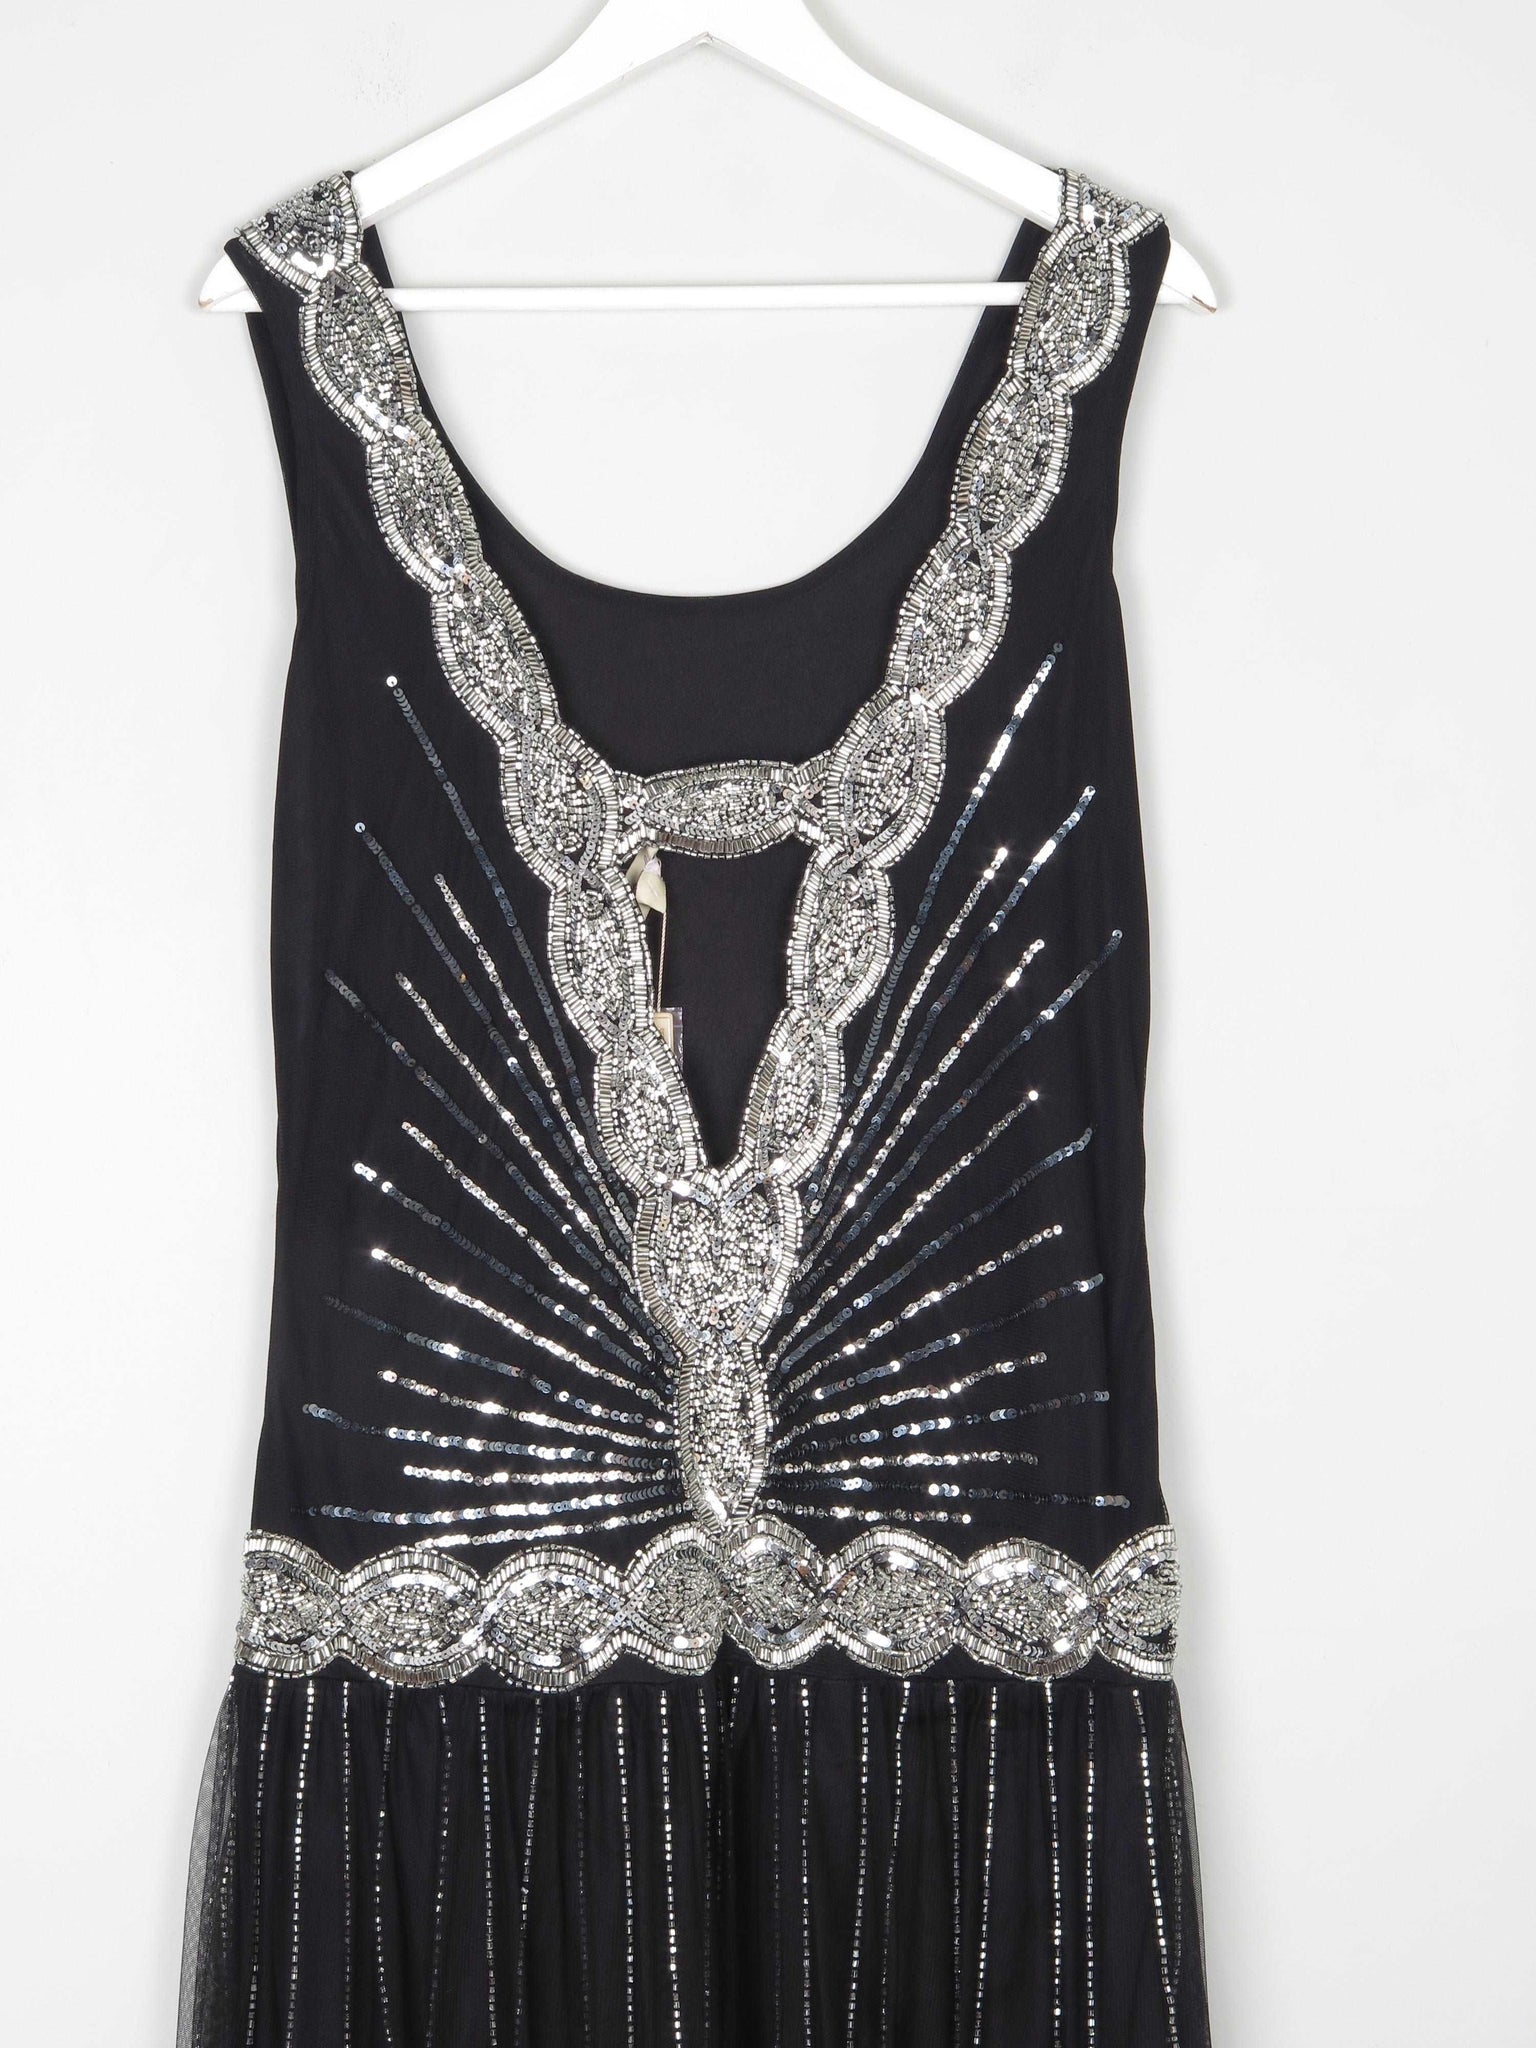 Black & Silver Flapper Style 1920s Dress 14 - The Harlequin